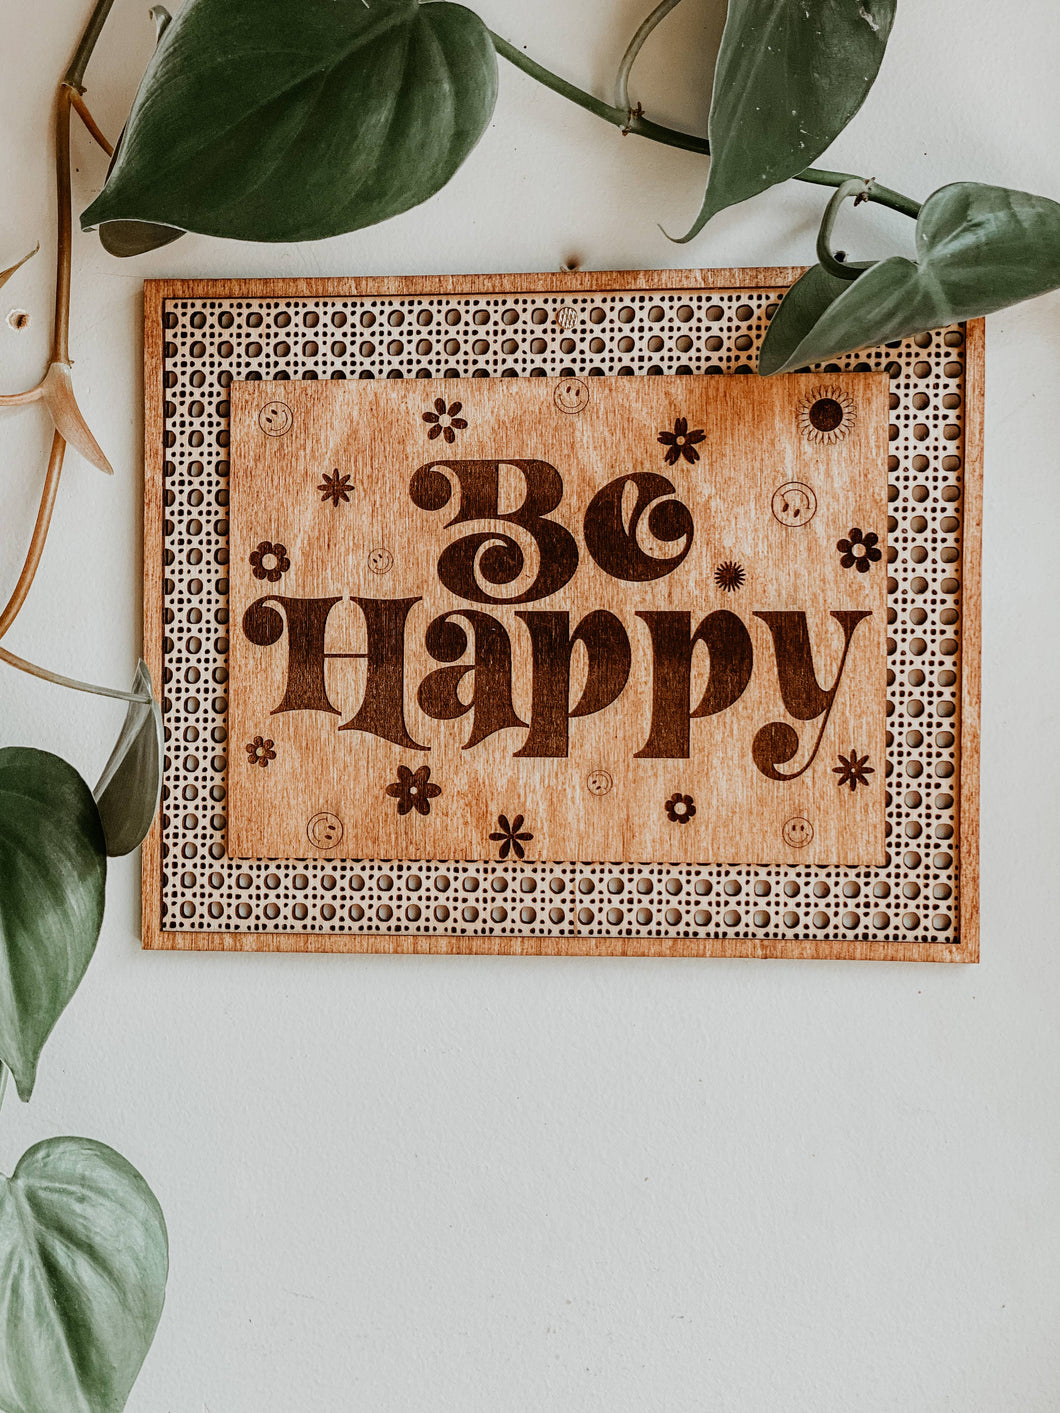 Be Happy Wall Hanging